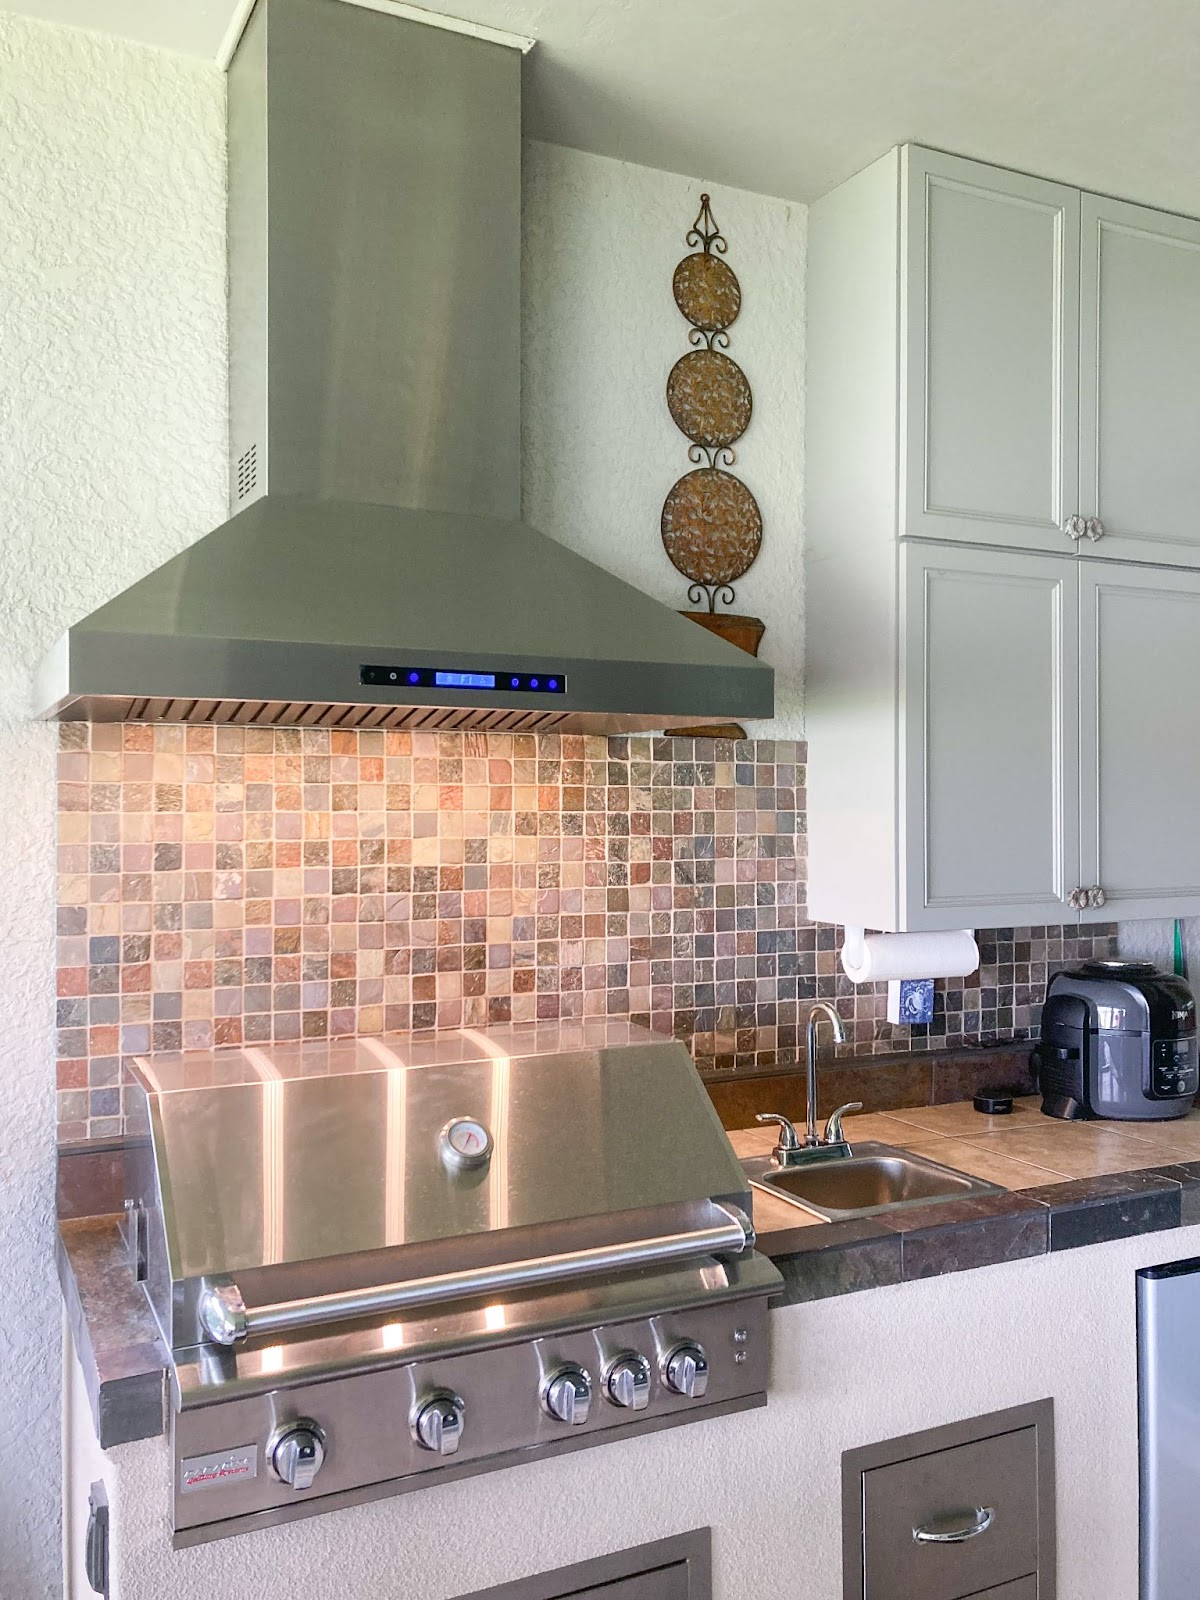 Warm kitchen design featuring a stainless steel Proline range hood, colorful backsplash, and decorative wall art for a homey touch - prolinerangehoods.com